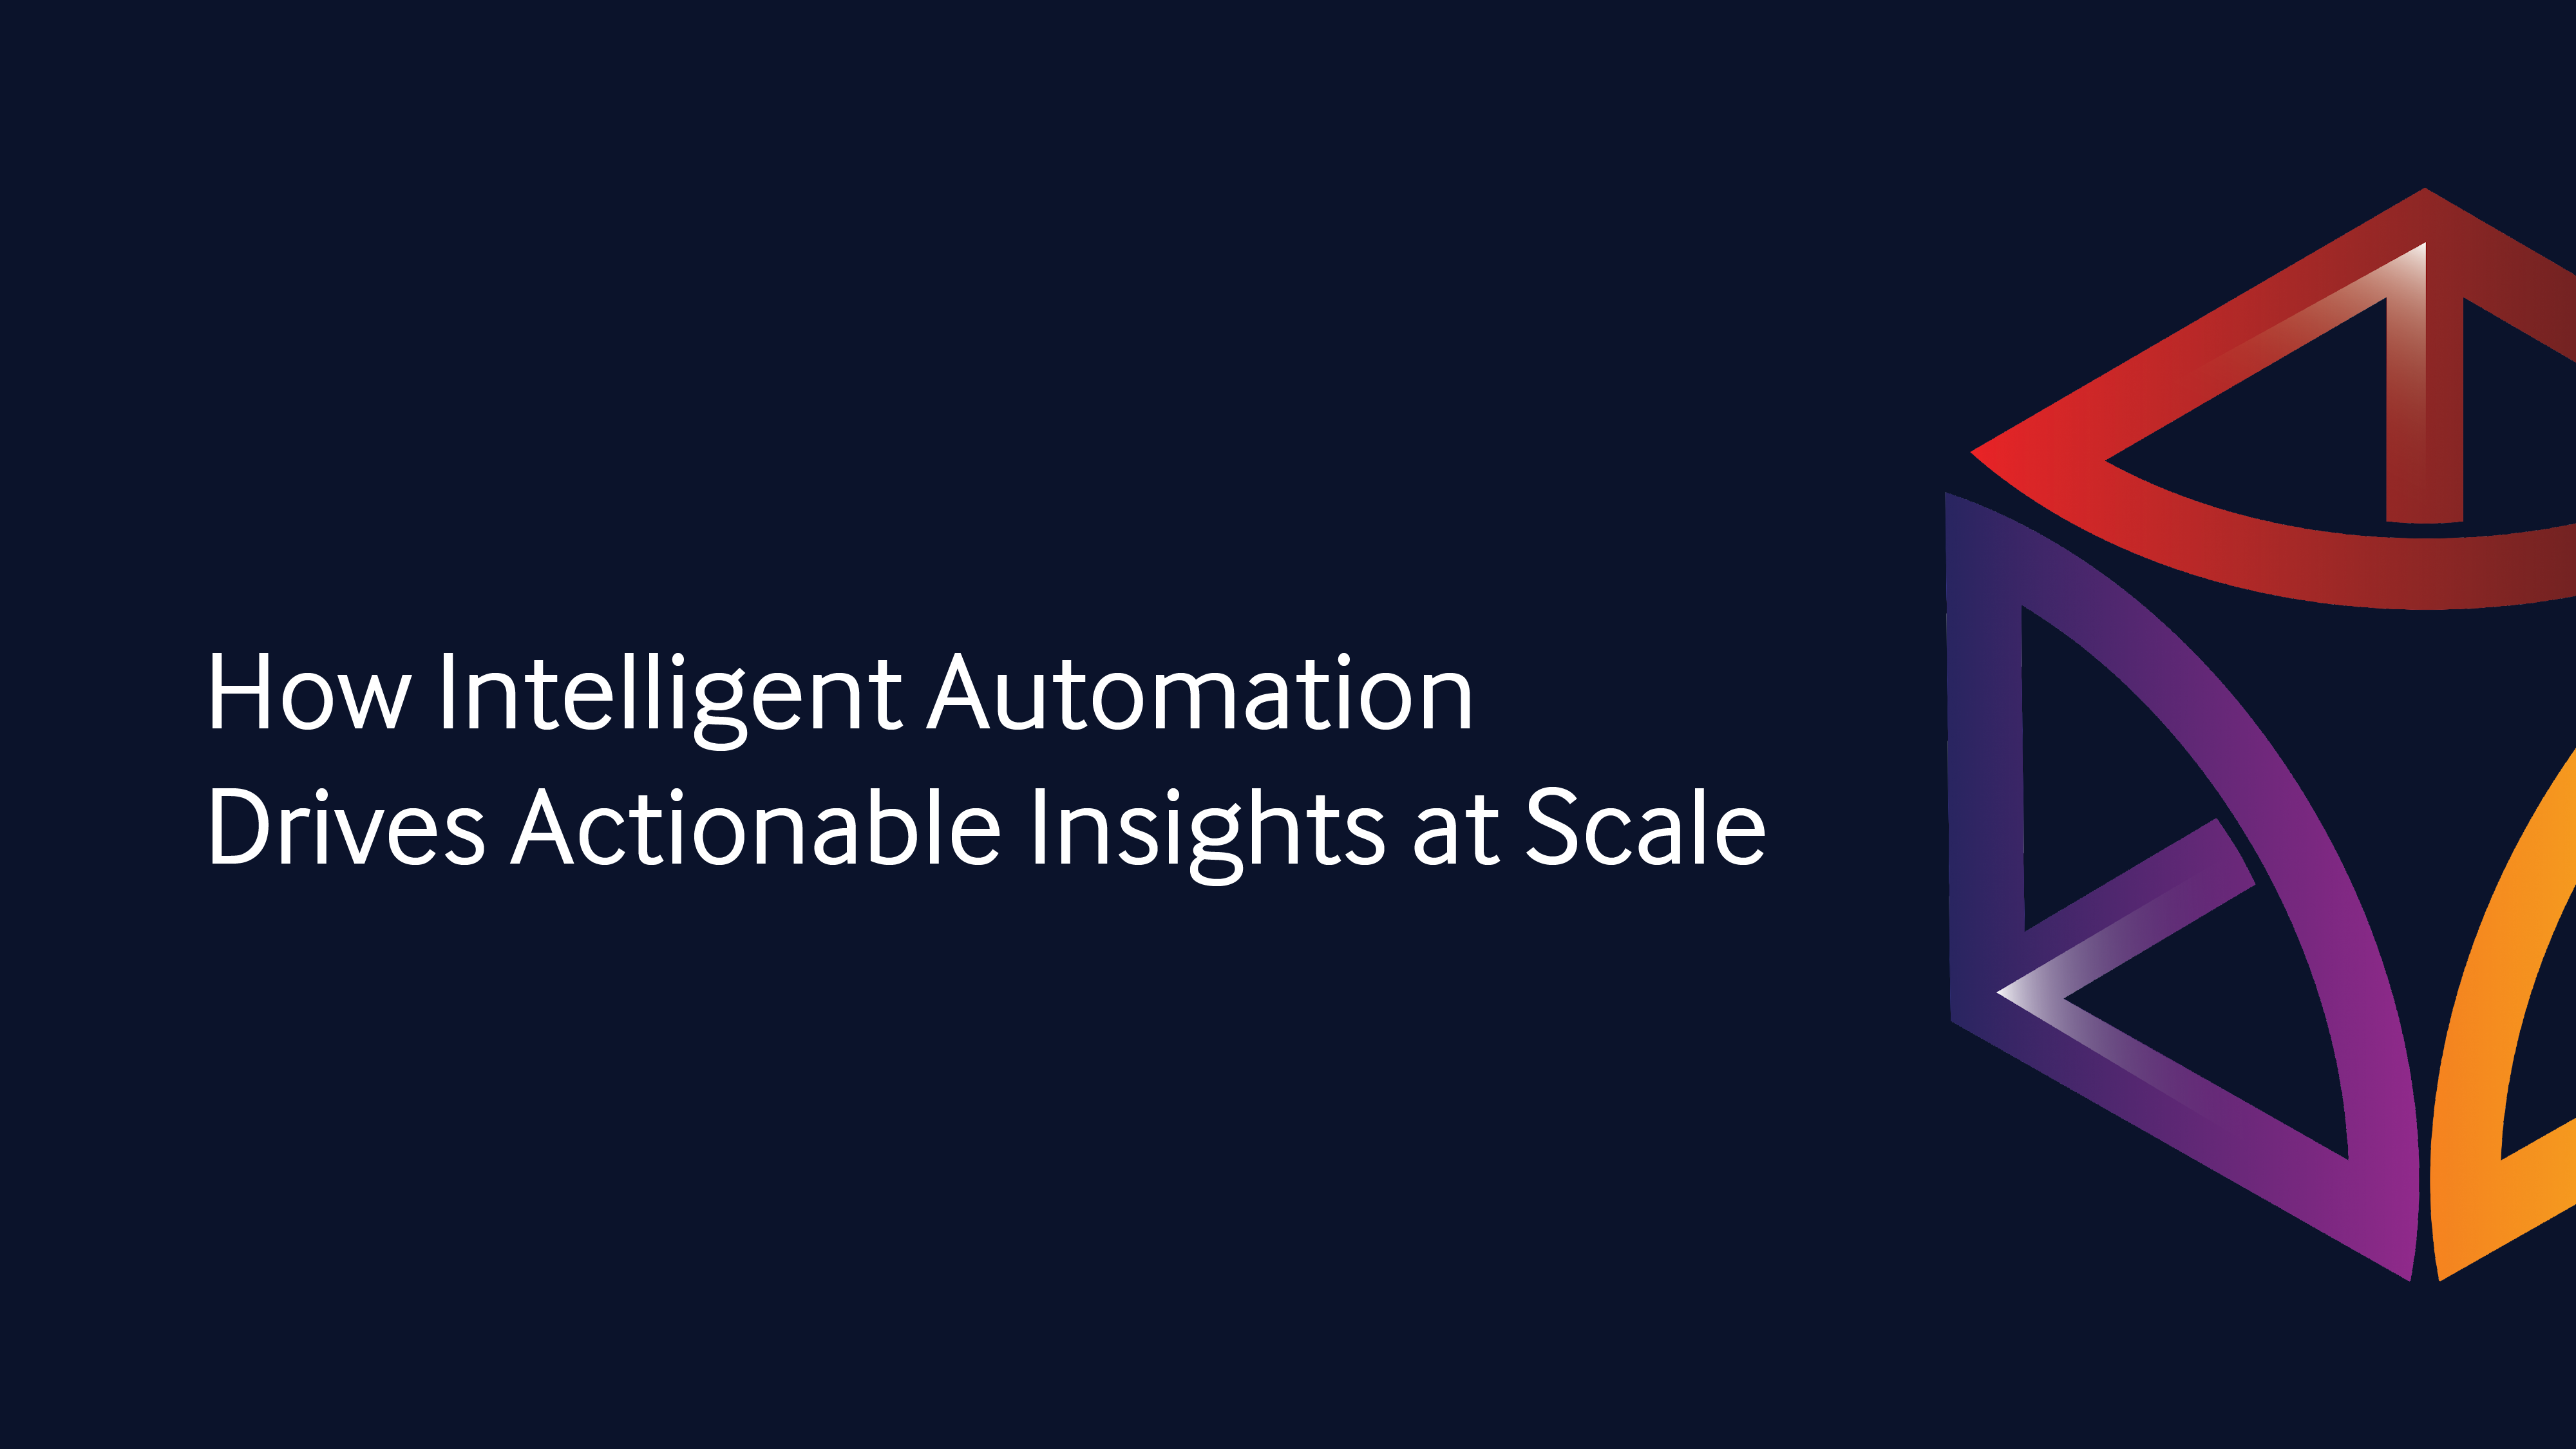 How Intelligent Automation Drives Actionable Insights at Scale